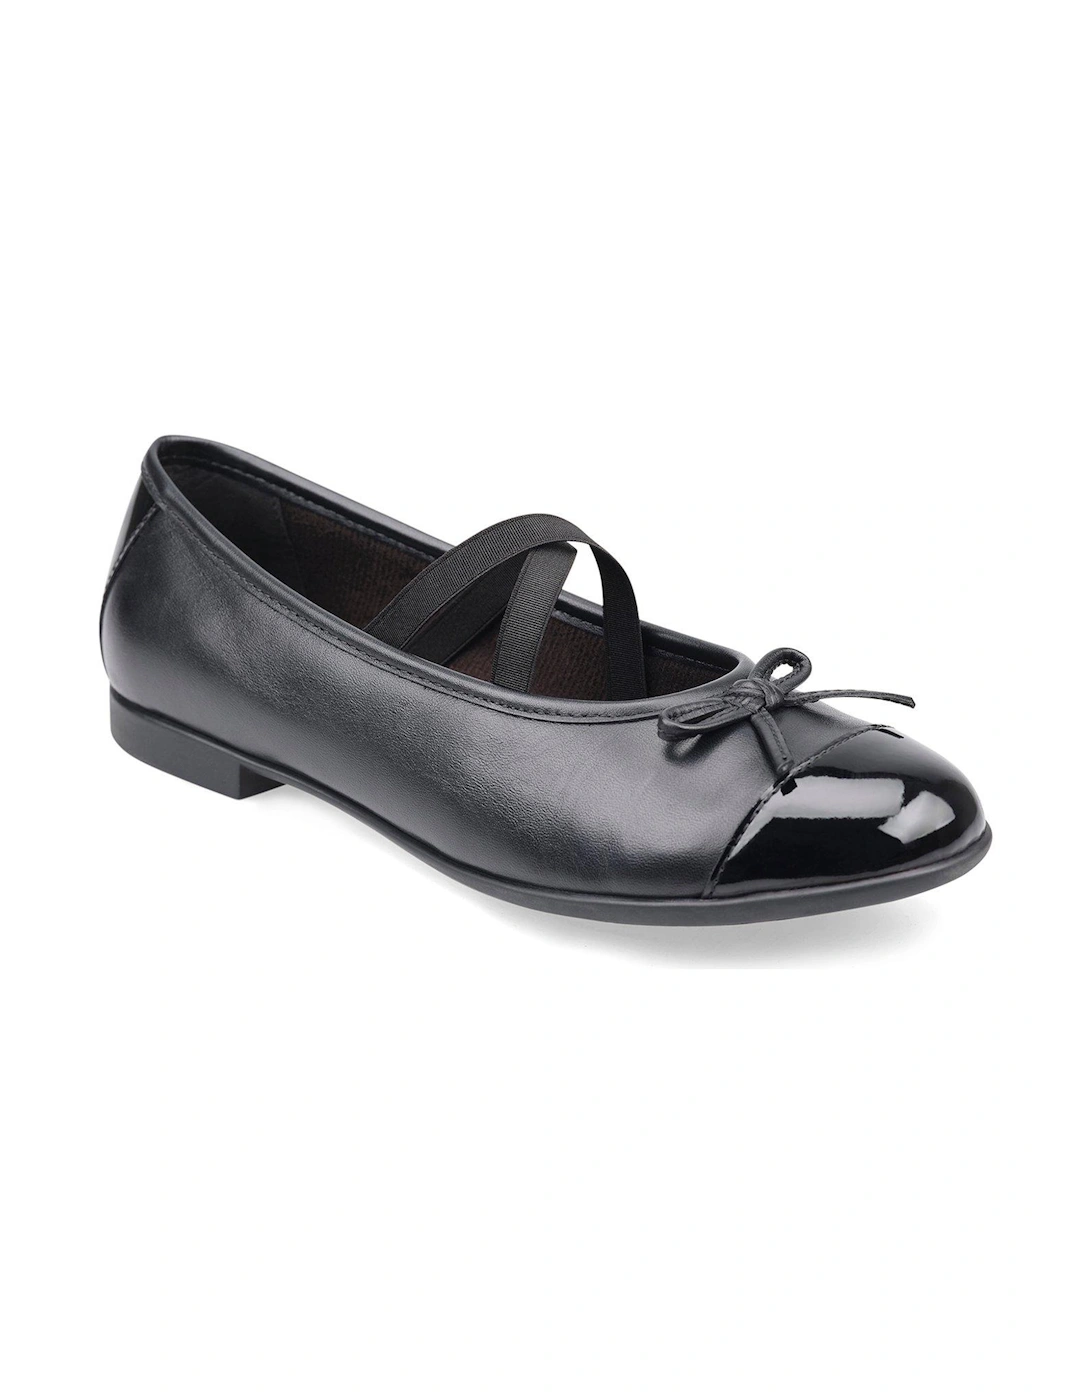 Girls Idol Patent Leather Slip On School Shoes with Bow - Black, 6 of 5